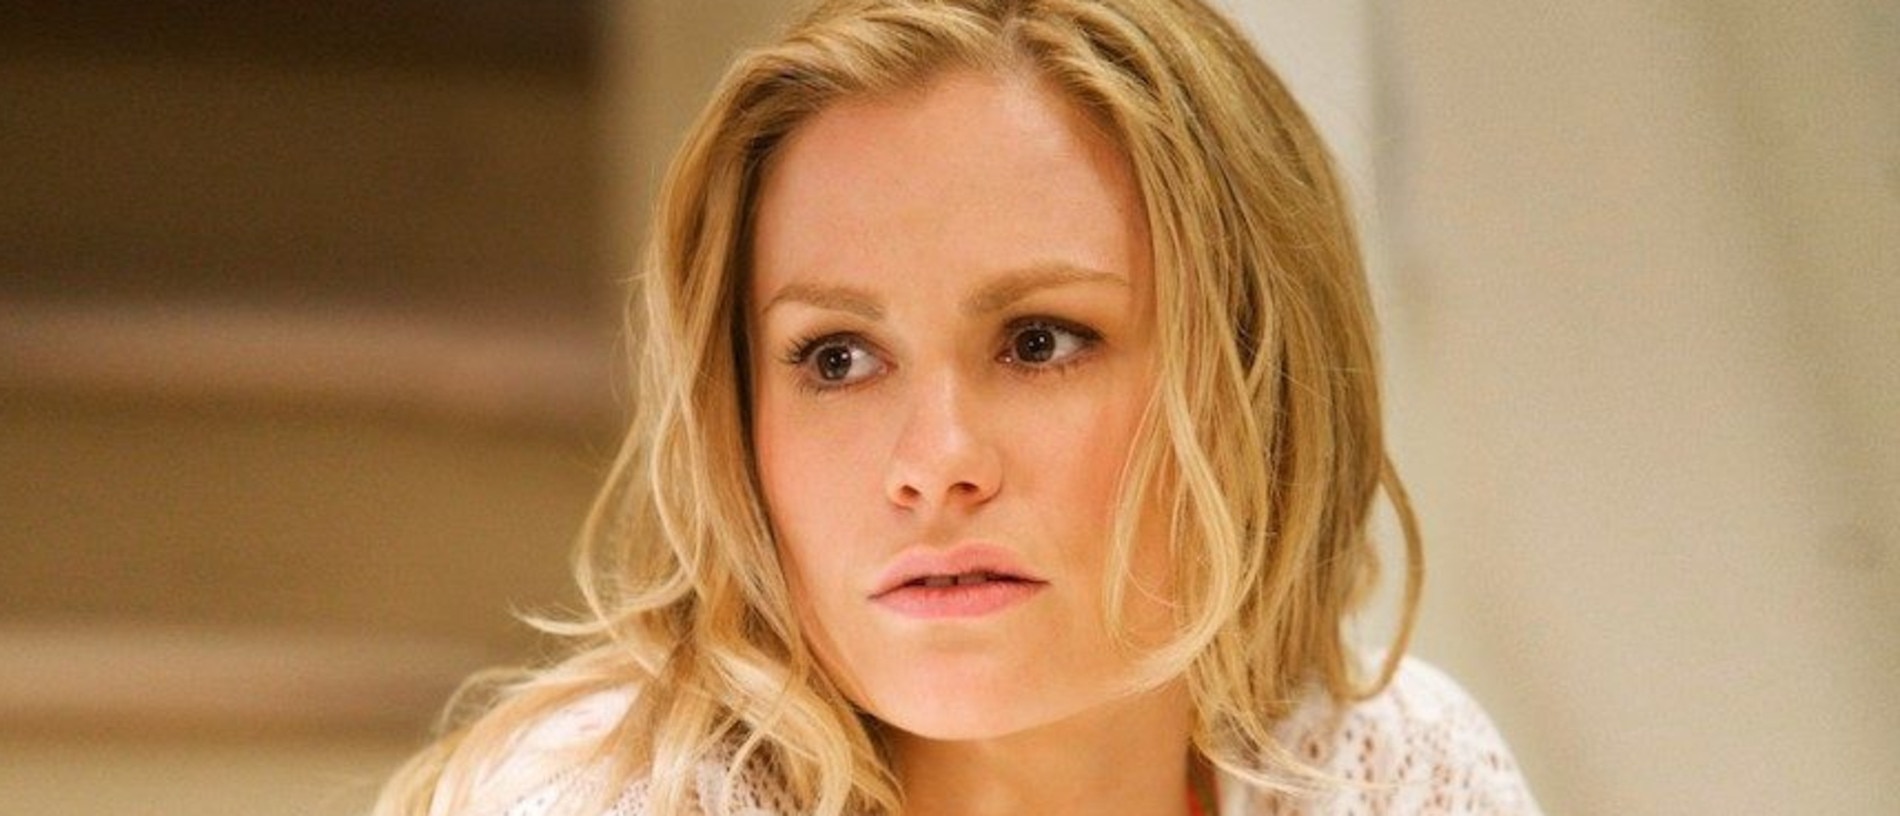 The Affair Anna Paquin Opens Up On Joining The Show And Her Dark Role 